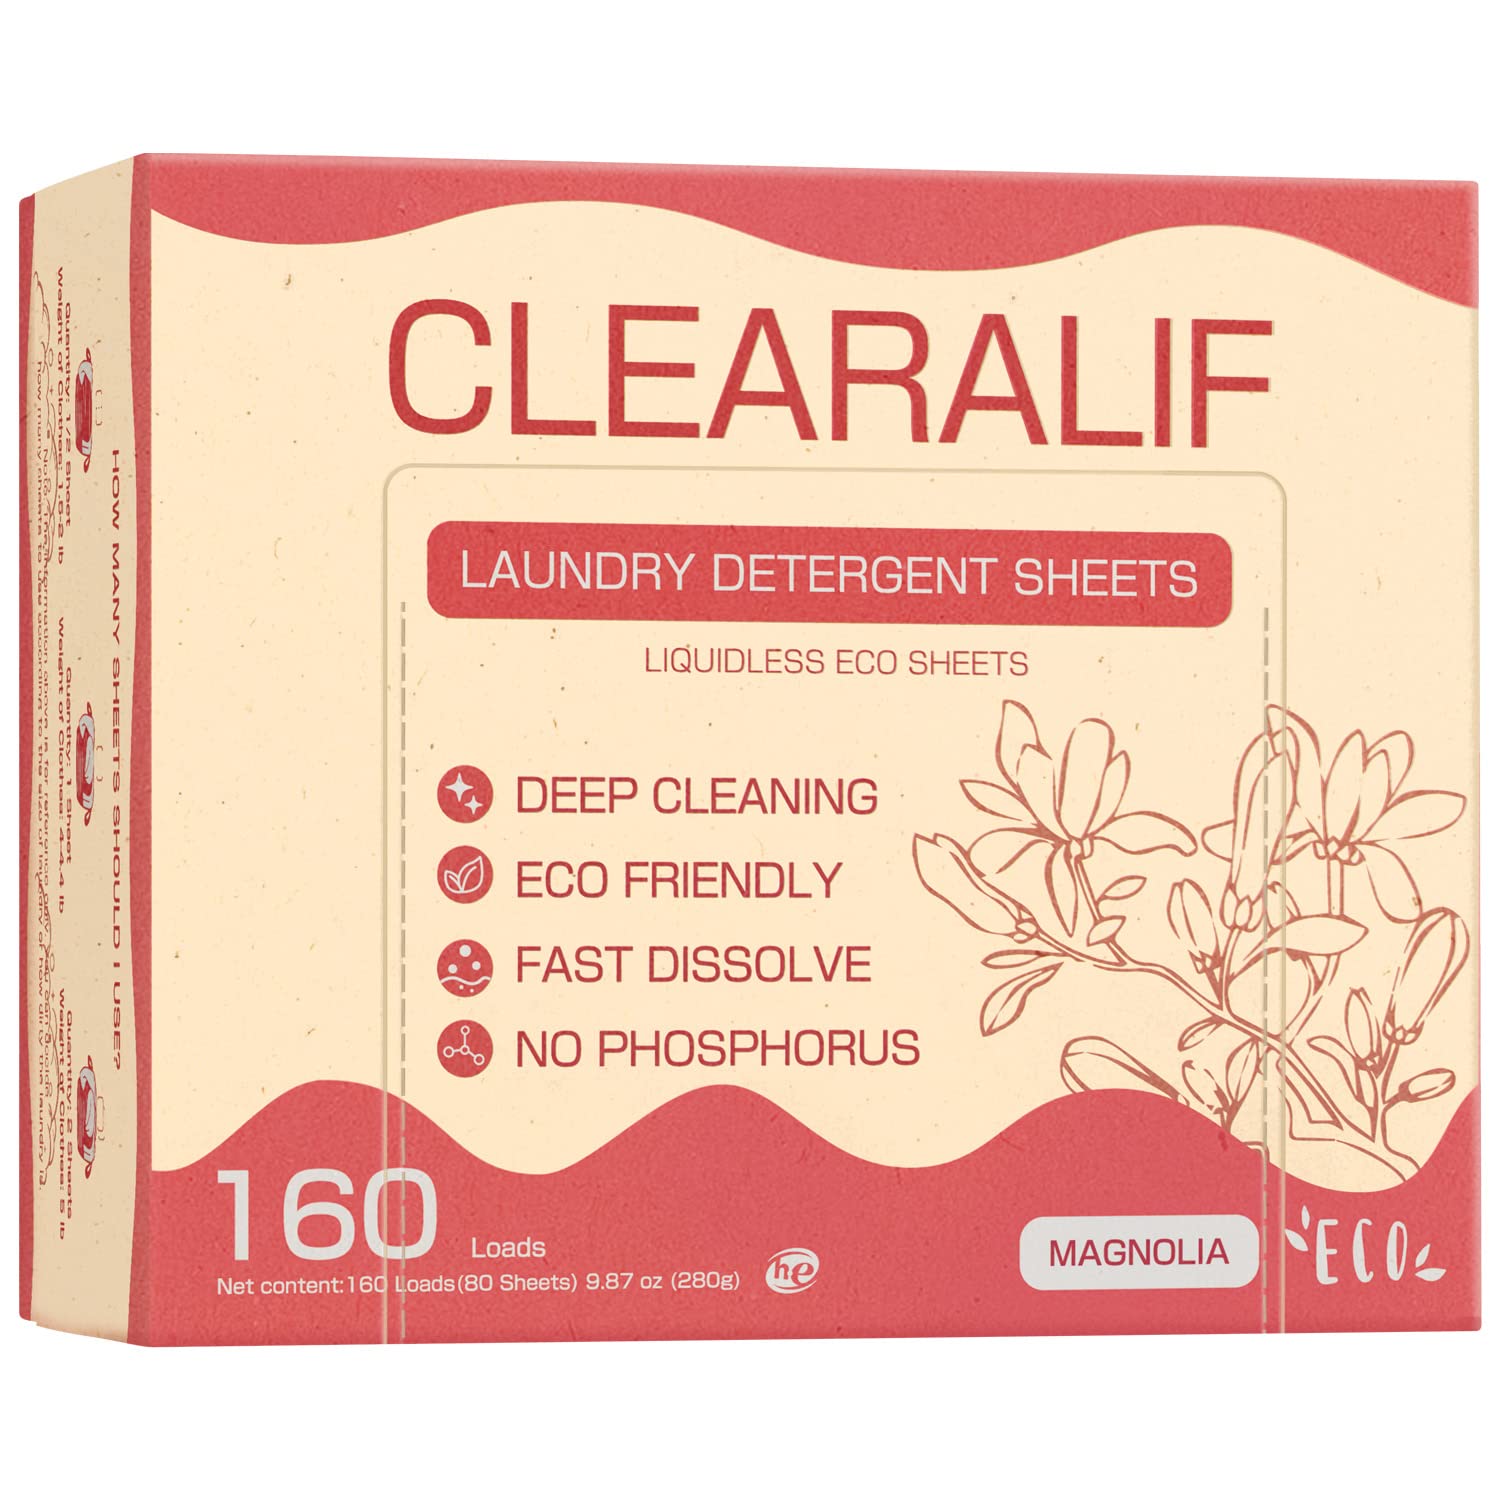 CLEARALIF Laundry Detergent Sheets Amber Dusk